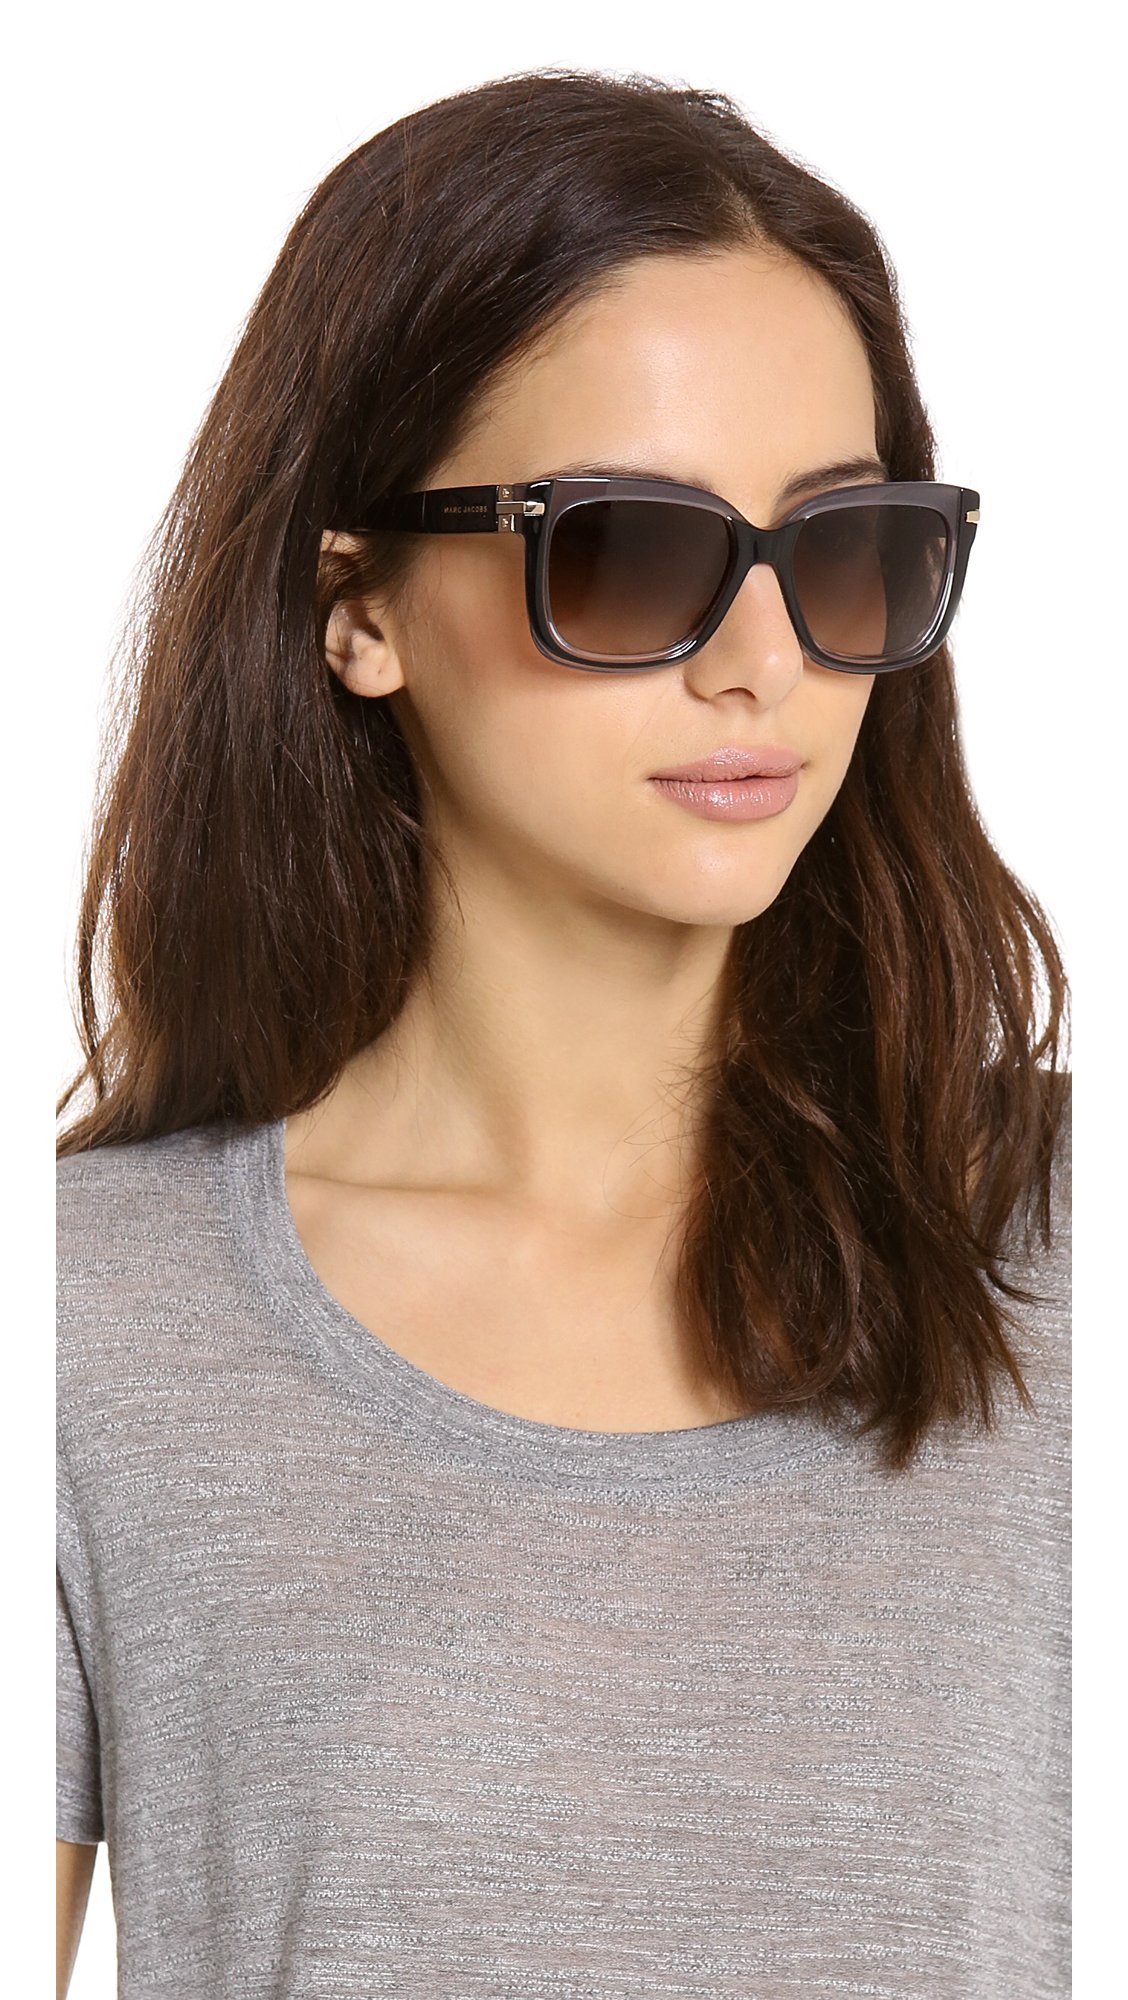 Lyst - Marc Jacobs Two Tone Sunglasses Black Greybrown Gradient in Gray